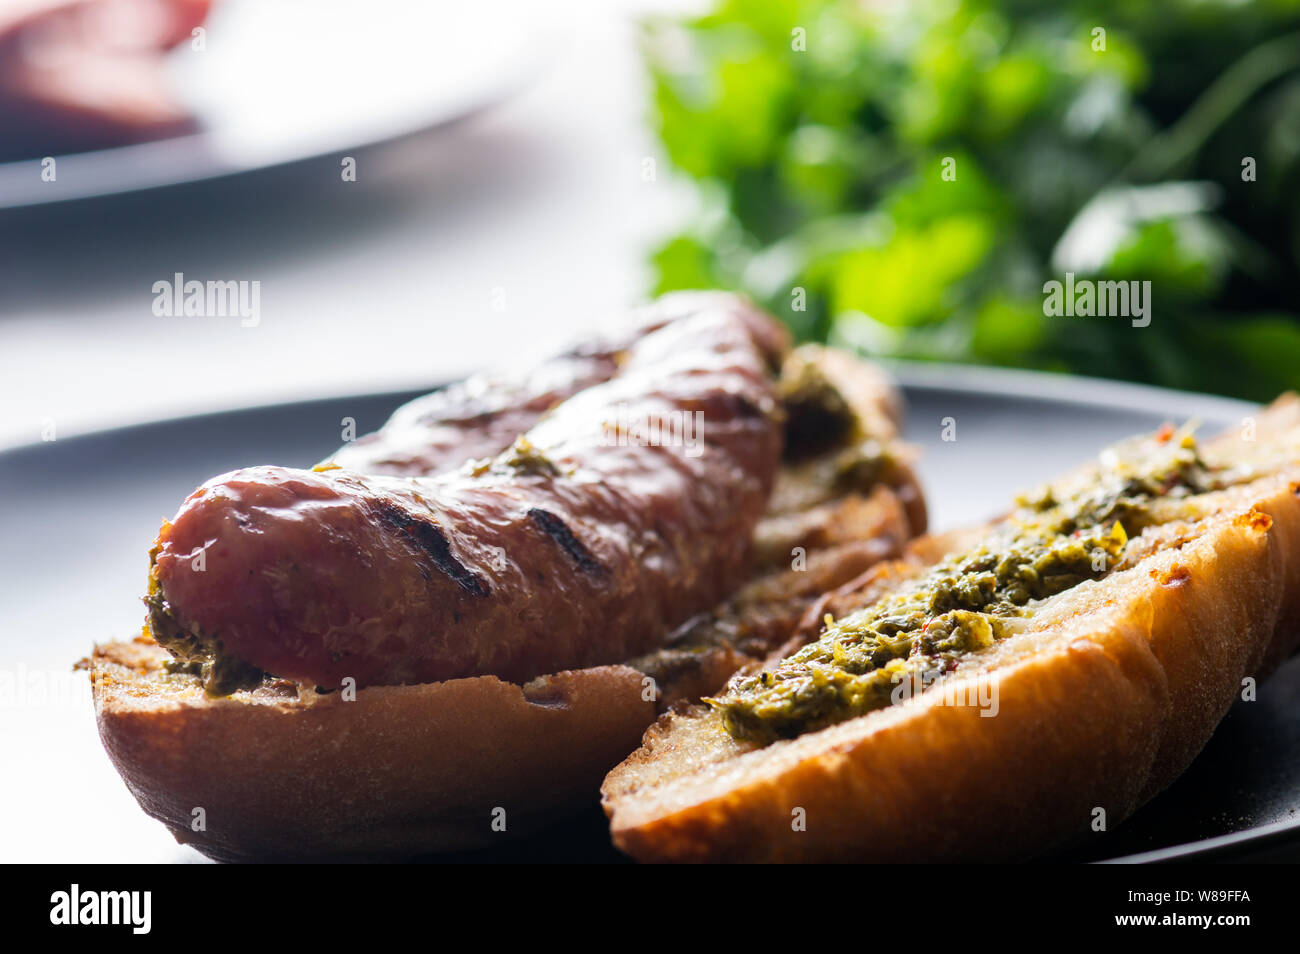 Choripan, south American style chorizo sandwich made with Argentine chorizo sausage with chimichurri, a parsley and olive oil based condiment Stock Photo